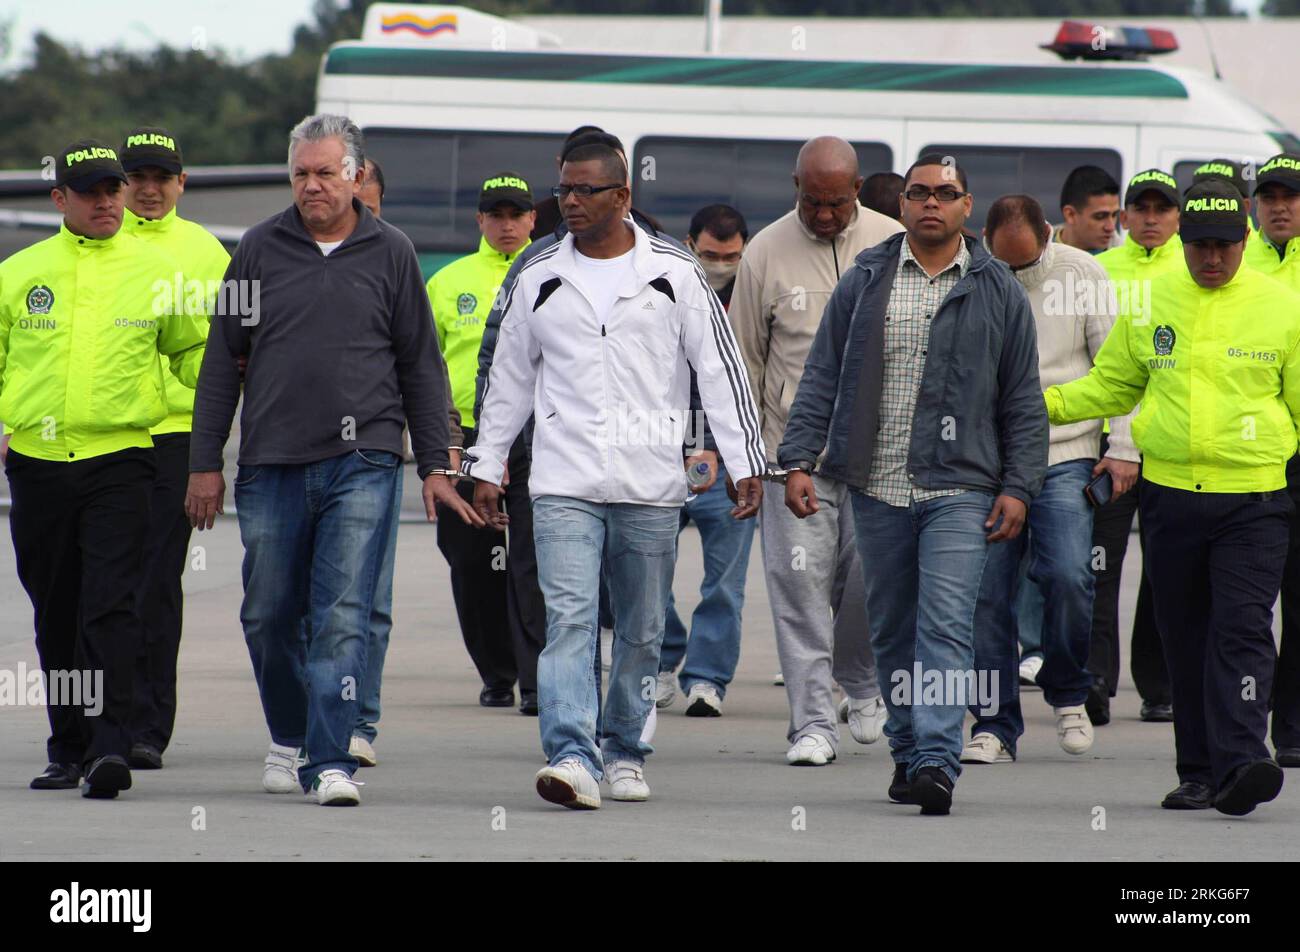 Bildnummer: 55554150  Datum: 28.06.2011  Copyright: imago/Xinhua (110628) -- BOGOTA, June 28, 2011 (Xinhua) -- Alleged Colombian drug traffickers, Luis Alberto Urrego (2nd L Front), Jose Leonardo Cuevas (3rd L Front), and Oscar Eduardo Galvis (4th L Front), are escorted by police in the Anti-Drug Air Base, in Bogota, Colombia, June 28, 2011. A group of 14 Colombian drug suspects were extradited to the United States on Tuesday to face charges of drug trafficking and money laundering in that country. (Xinhua/Cesar Marino) (wjd) COLOMBIA-BOGOTA-DRUG TRAFFICKERS PUBLICATIONxNOTxINxCHN Gesellschaft Stock Photo